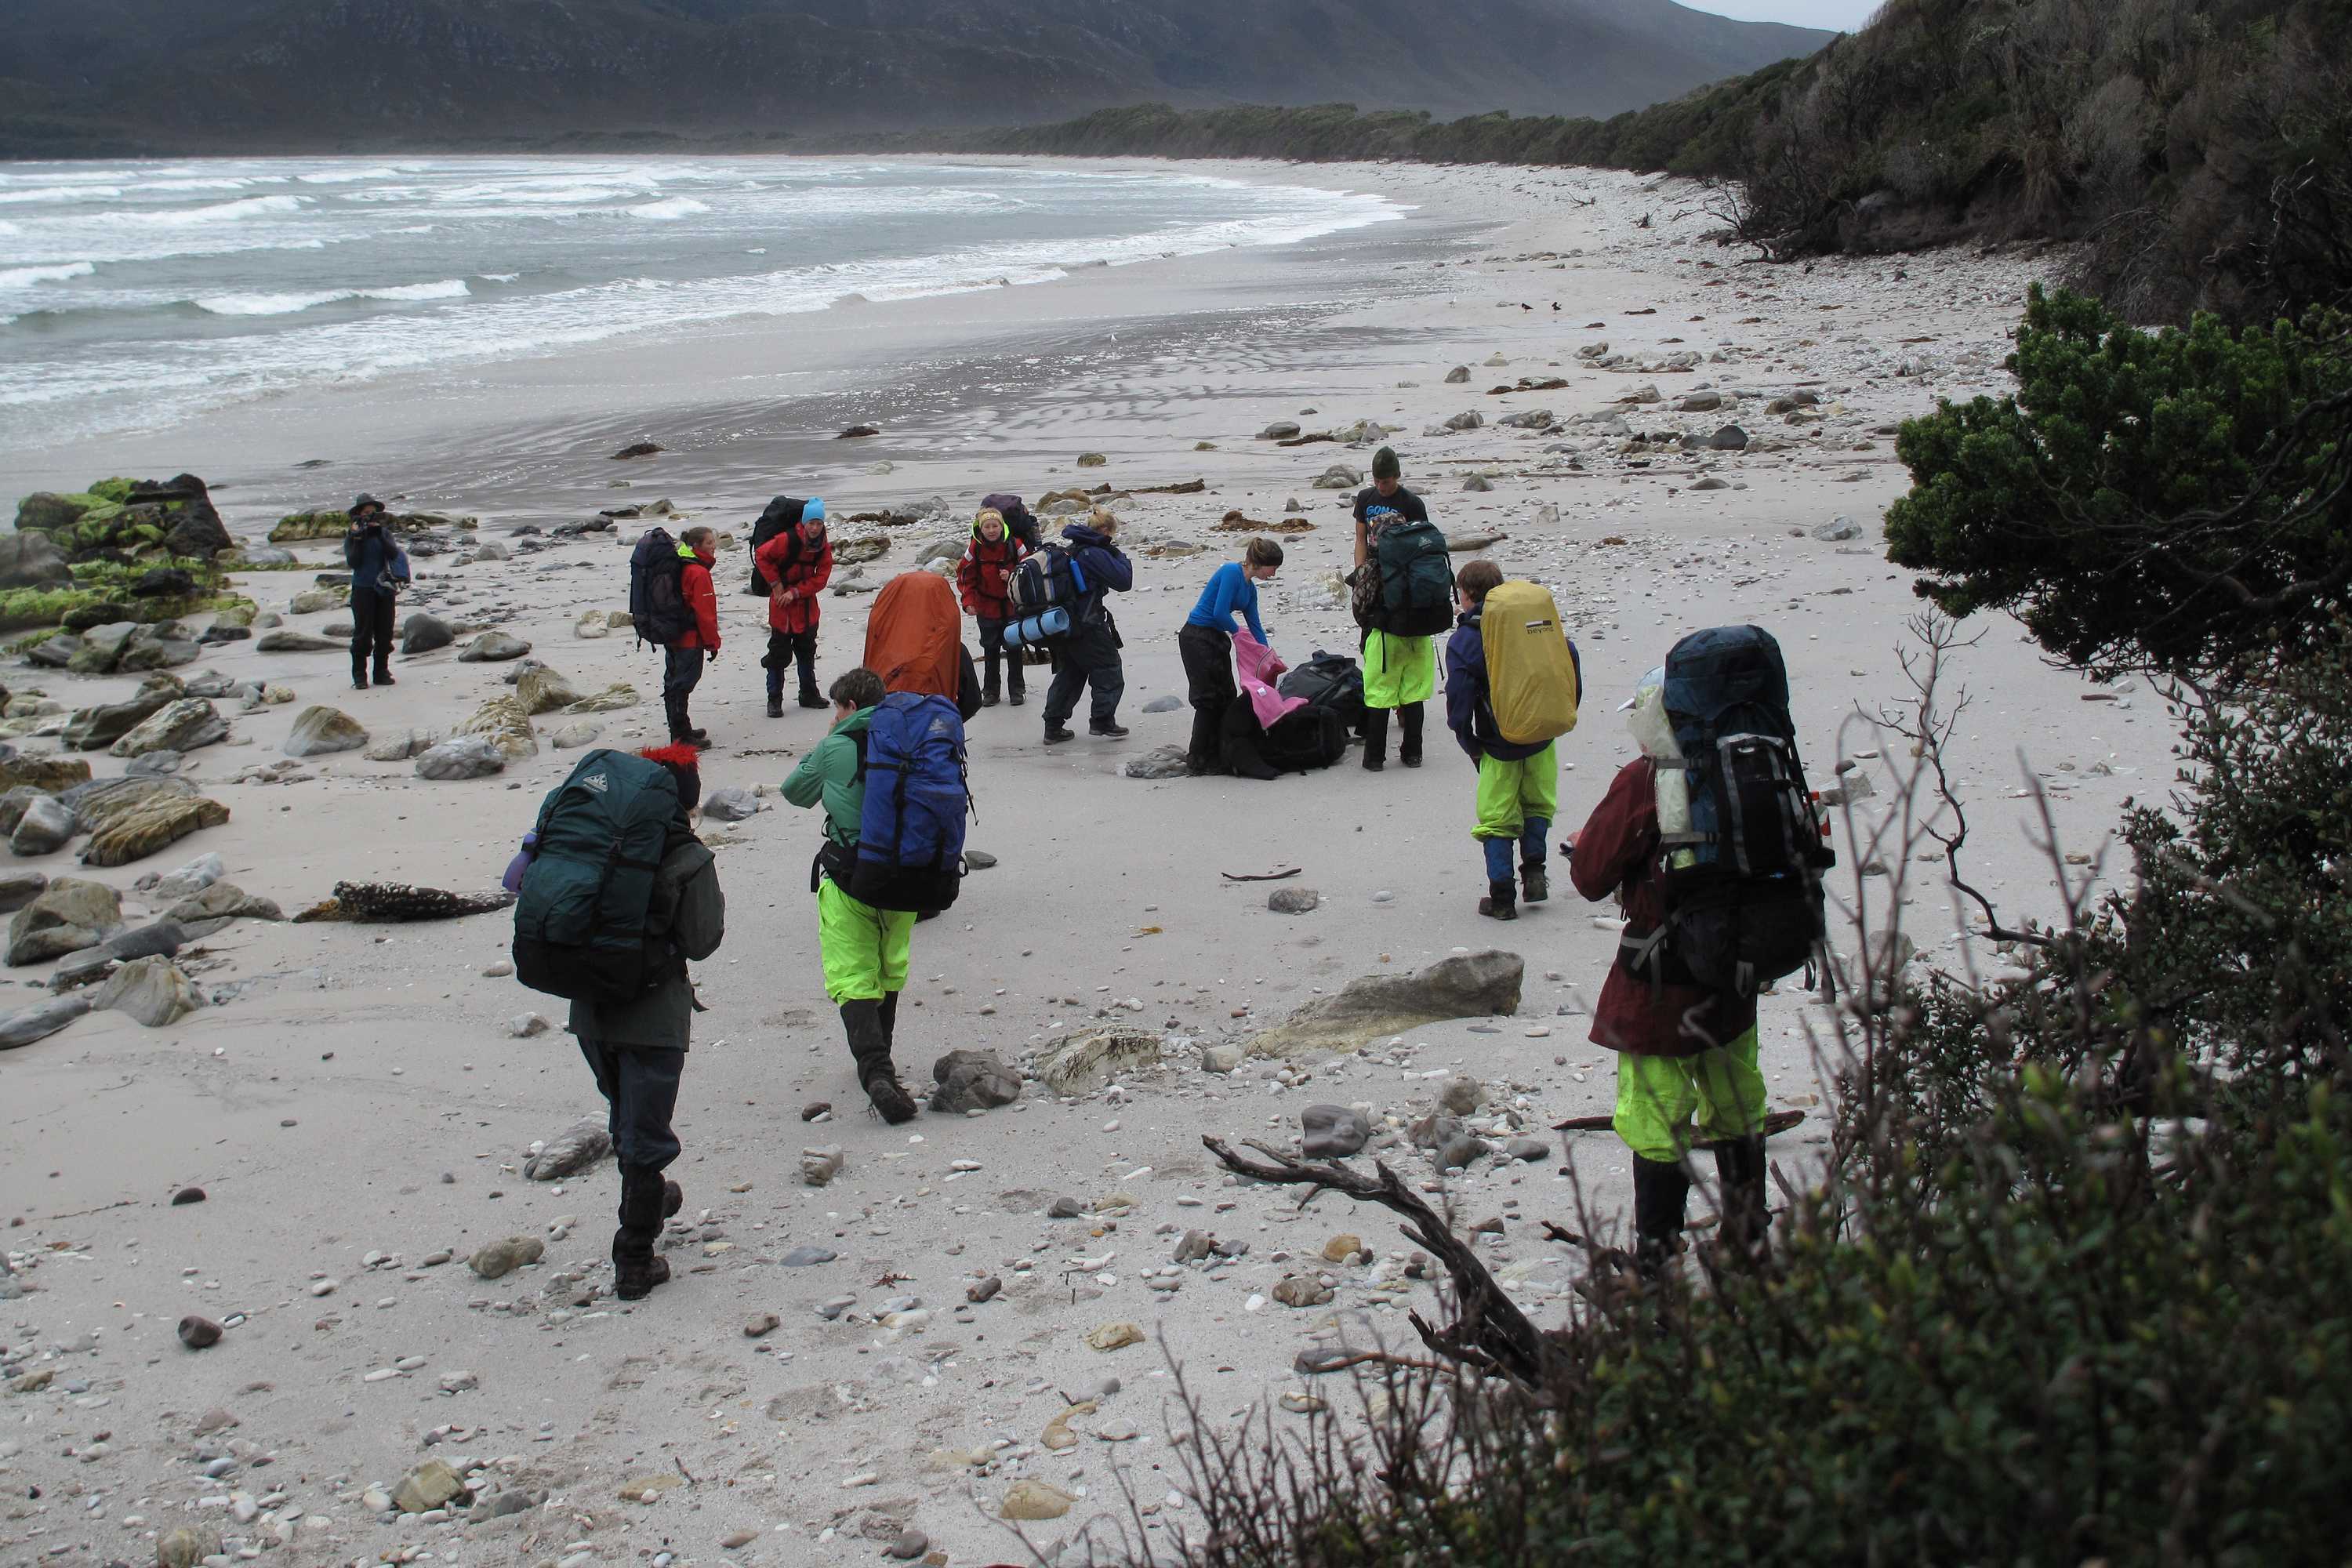 A group of people with large backpacks walk along a white sandy beach on a dull day, with hills rising up in the background. Photo: Andrew Hughes.